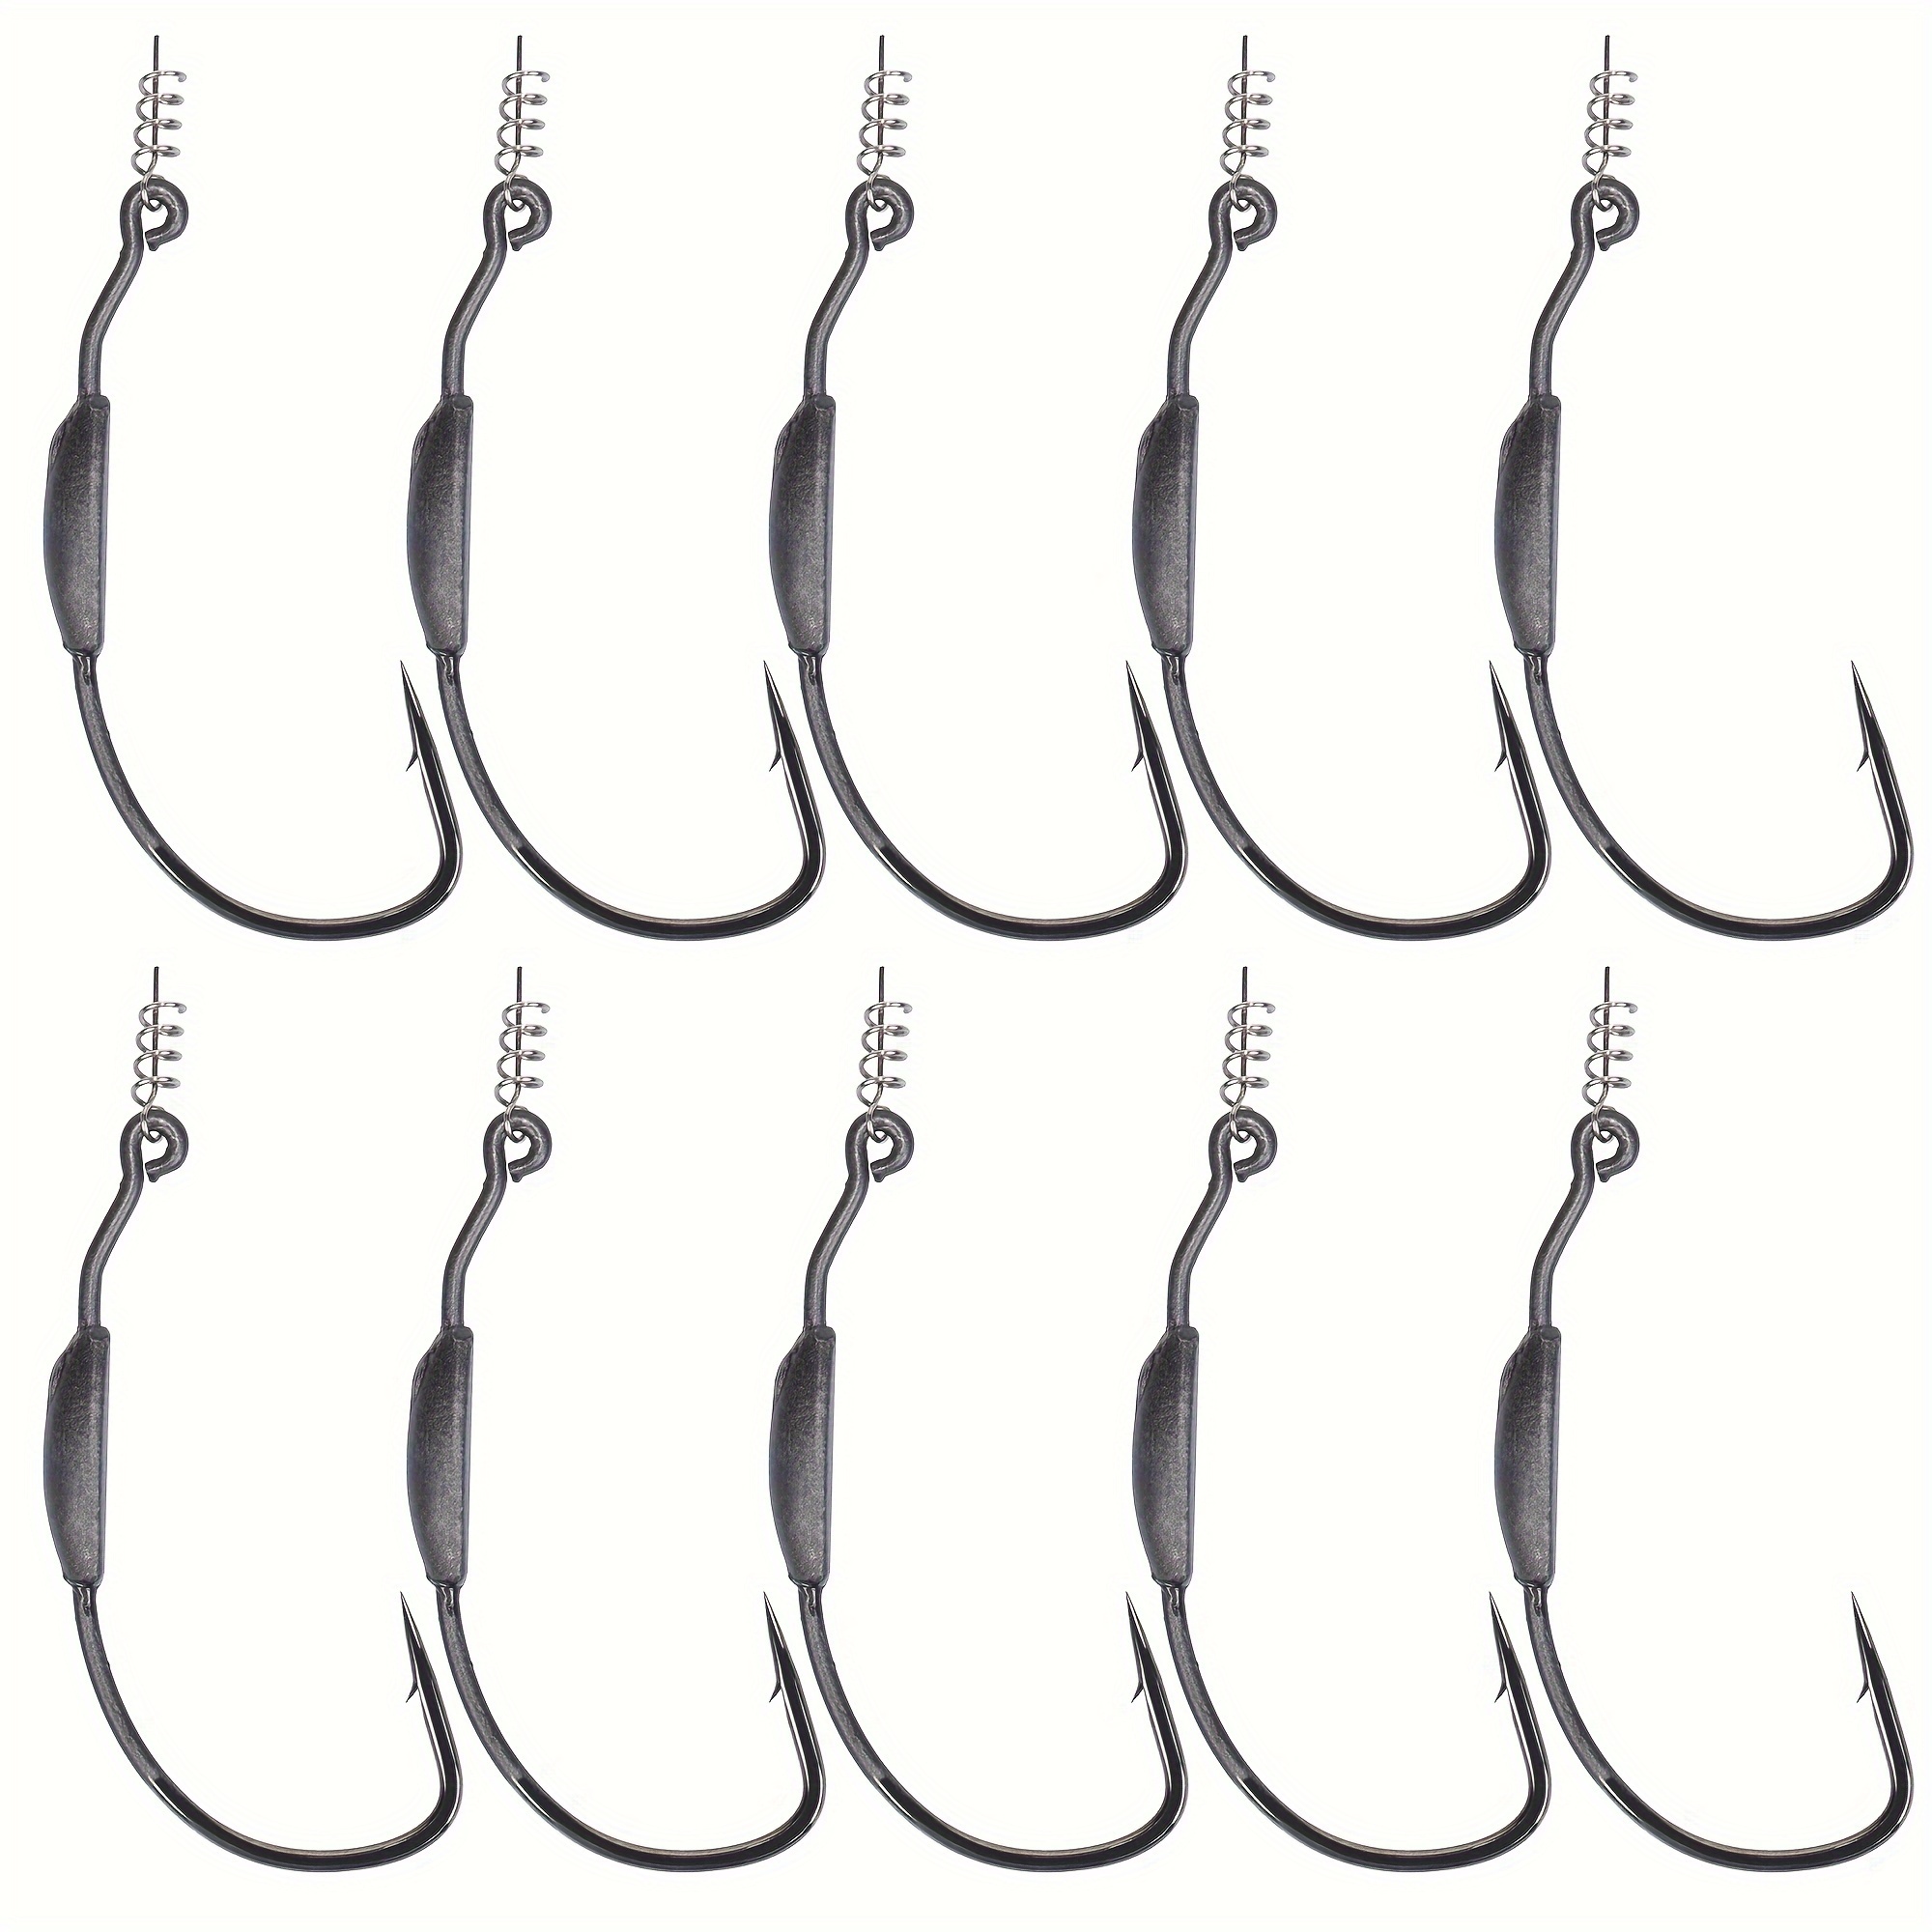 

10 Pieces Of Weighted Hooks With Twist Lock, Soft Plastic Swimbaits Offset Weedless Hooks 3/0 4/0 5/0, Suitable For Bass Fishing With Drop Shot Swimbait Hooks.